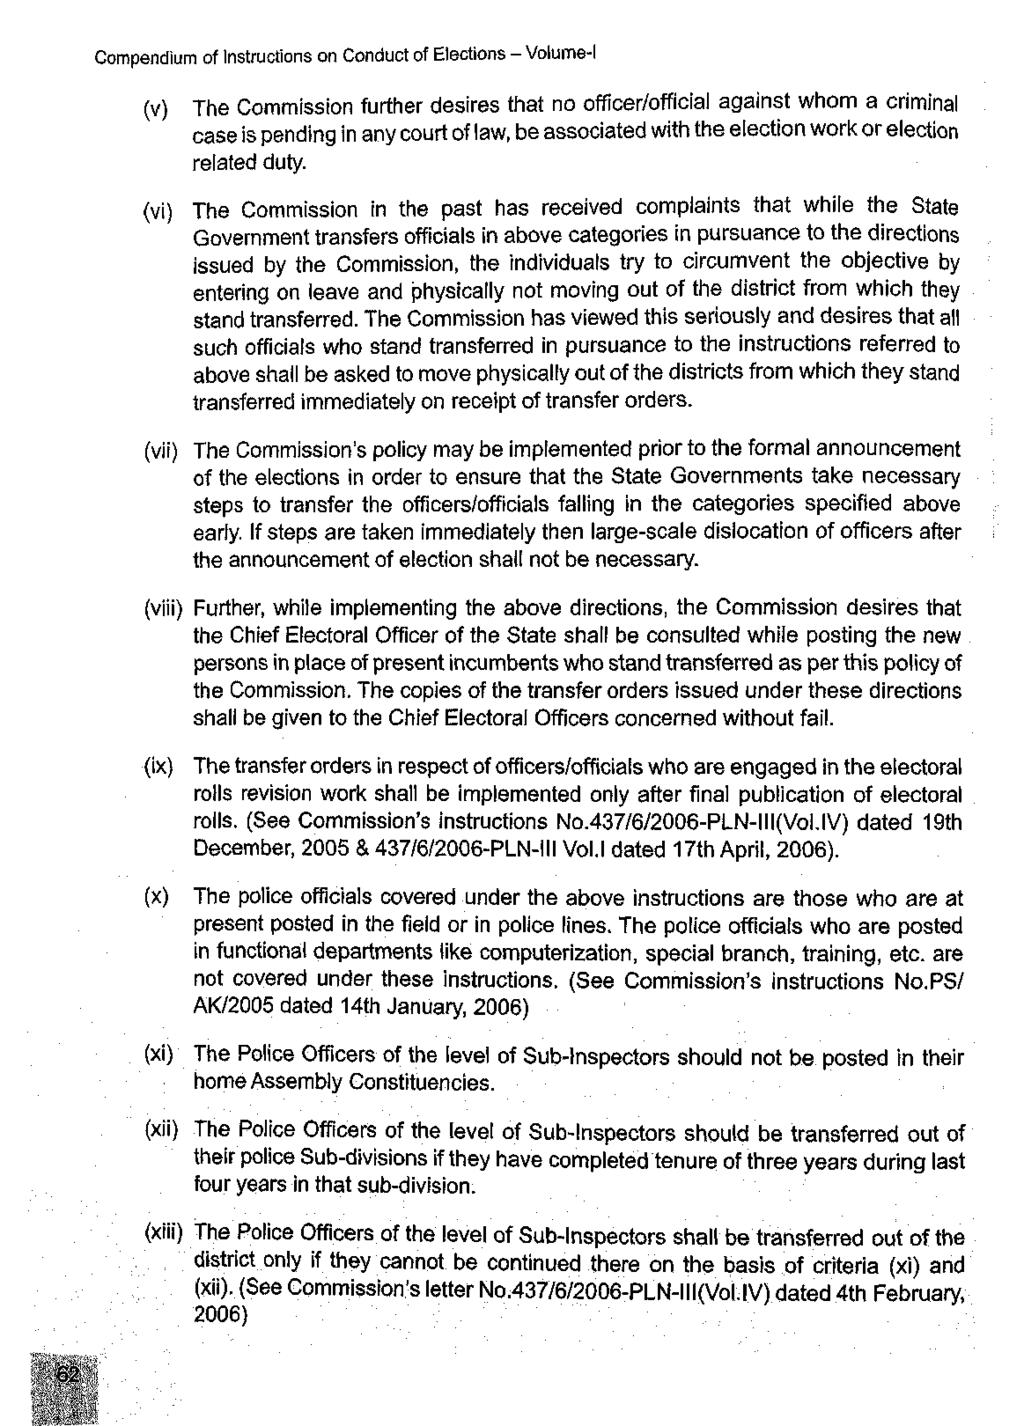 Compendium of Instructions on Conduct of Elections - Volume-I (v) The Commission further desires that no officer/official against whom a criminal case is pending in any court of law, be associated